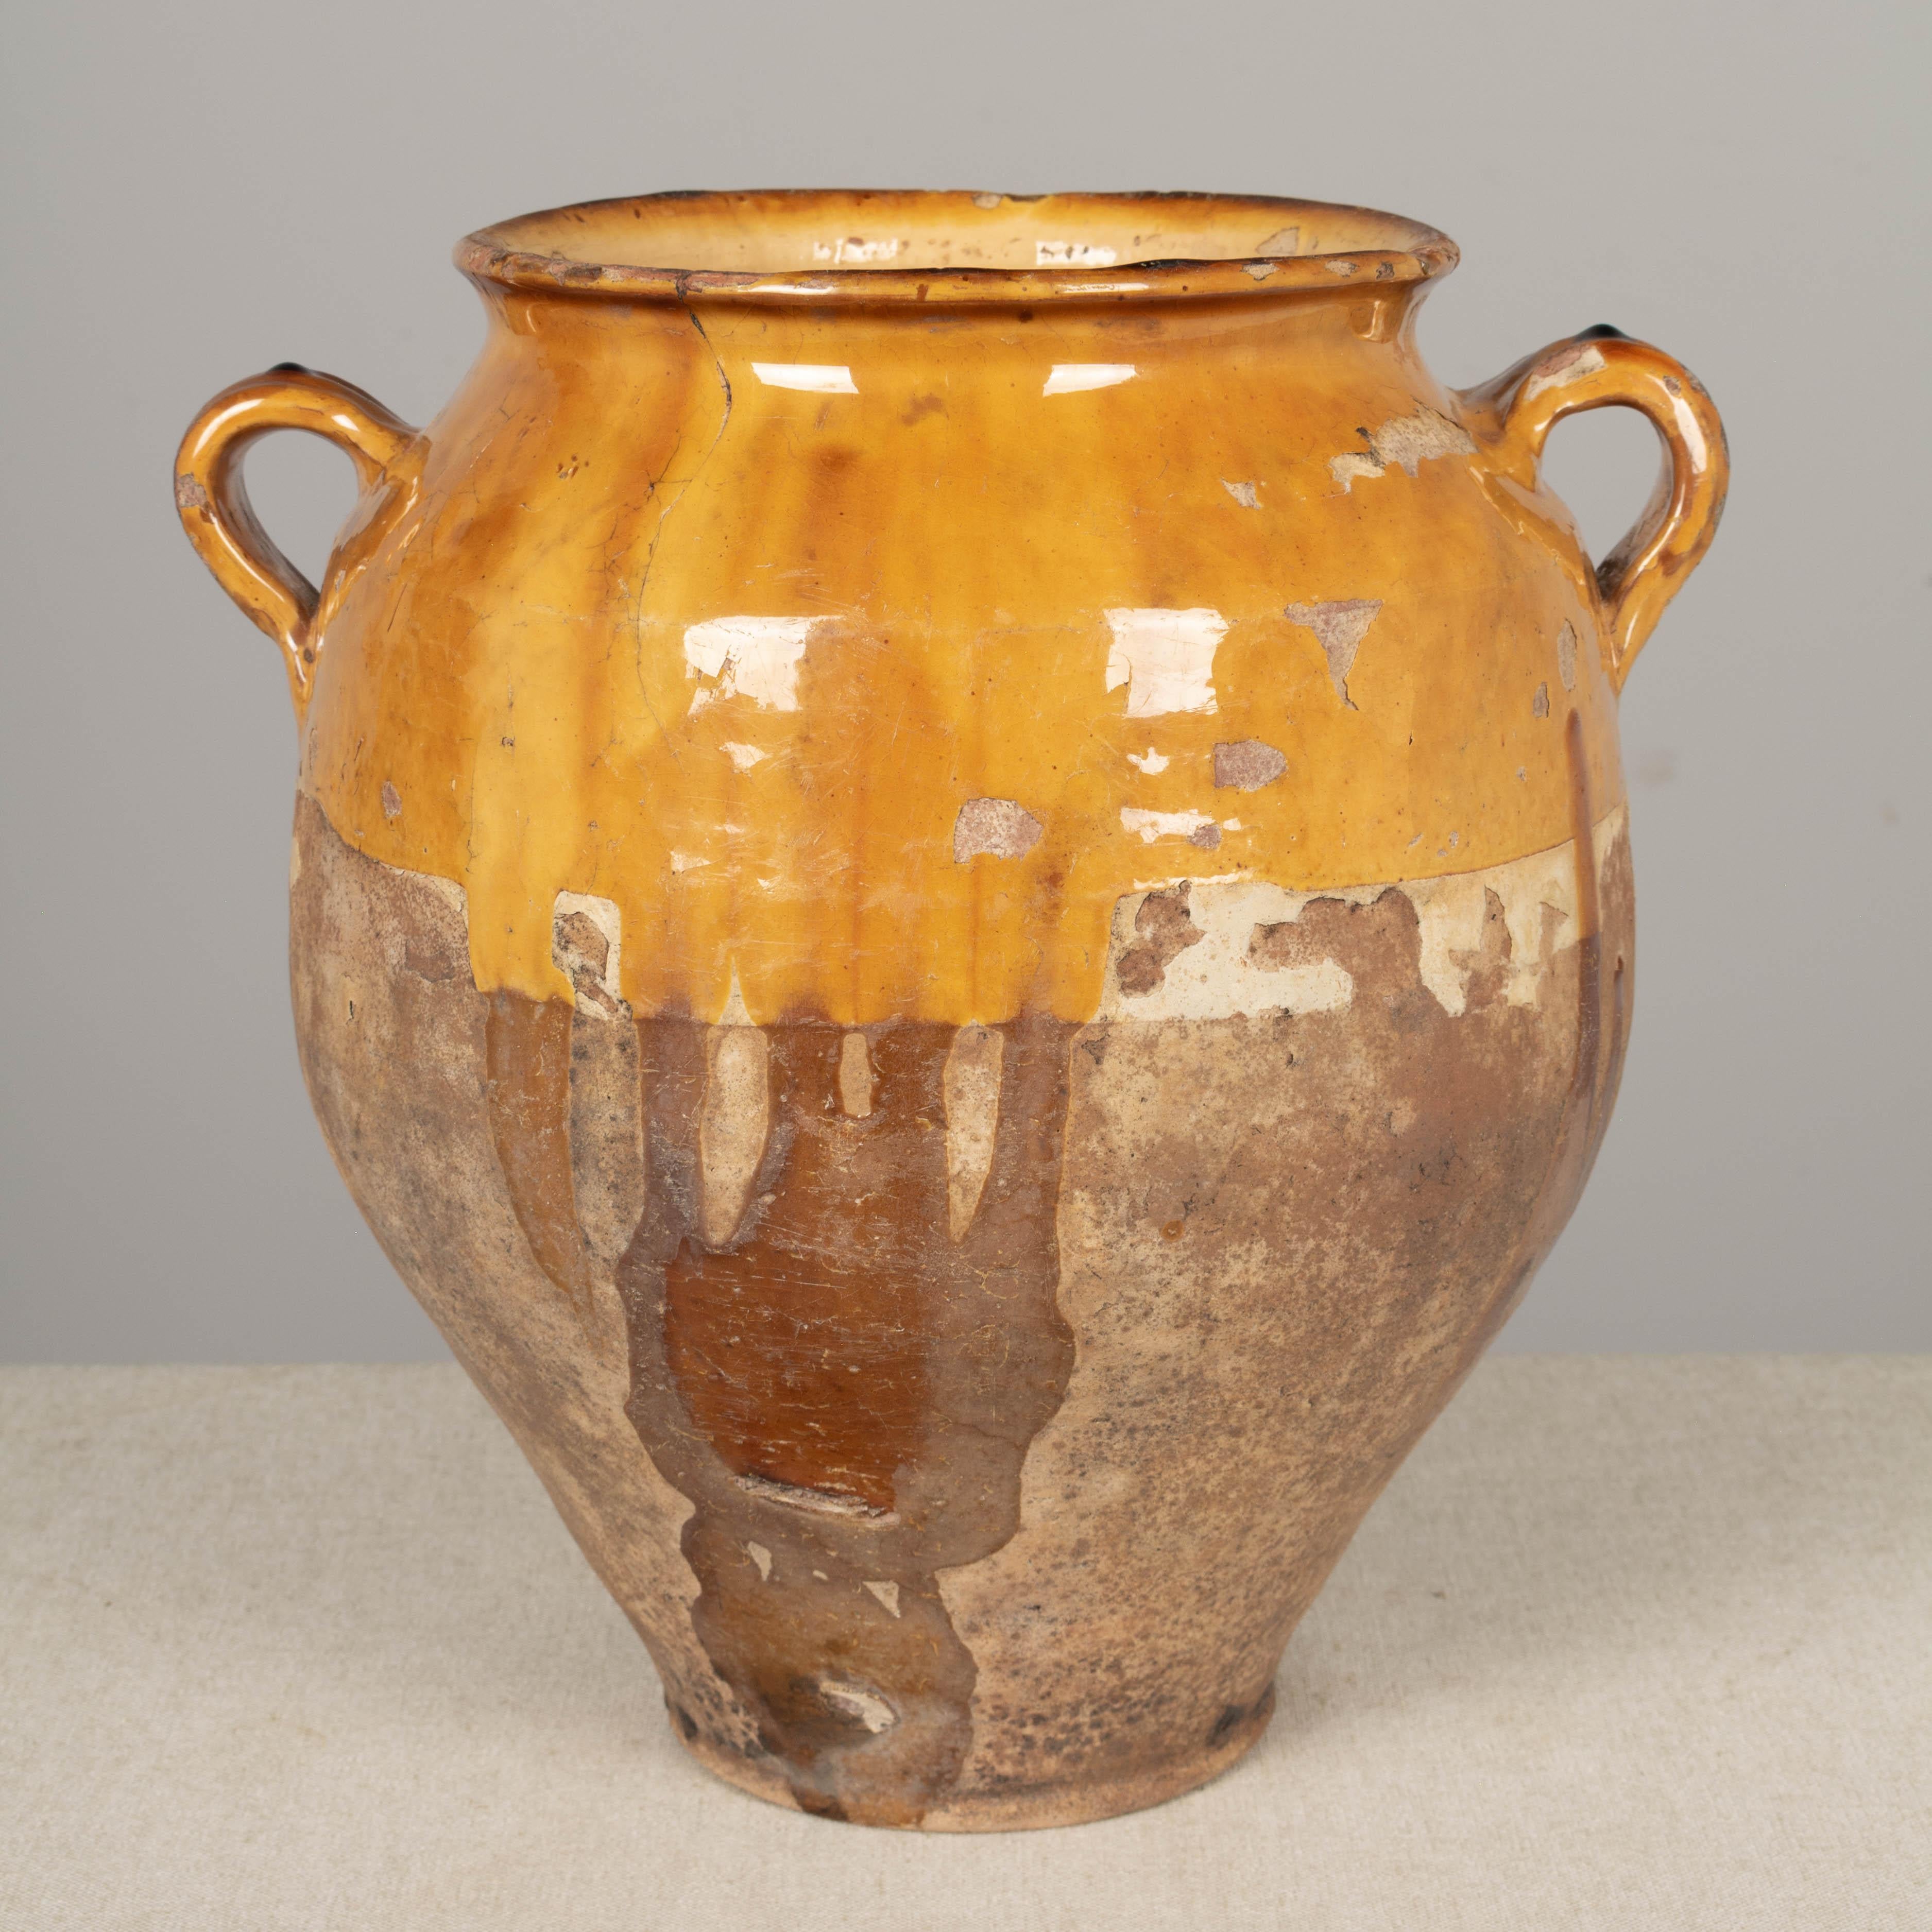 19th Century French Terracotta Confit Pot For Sale 2